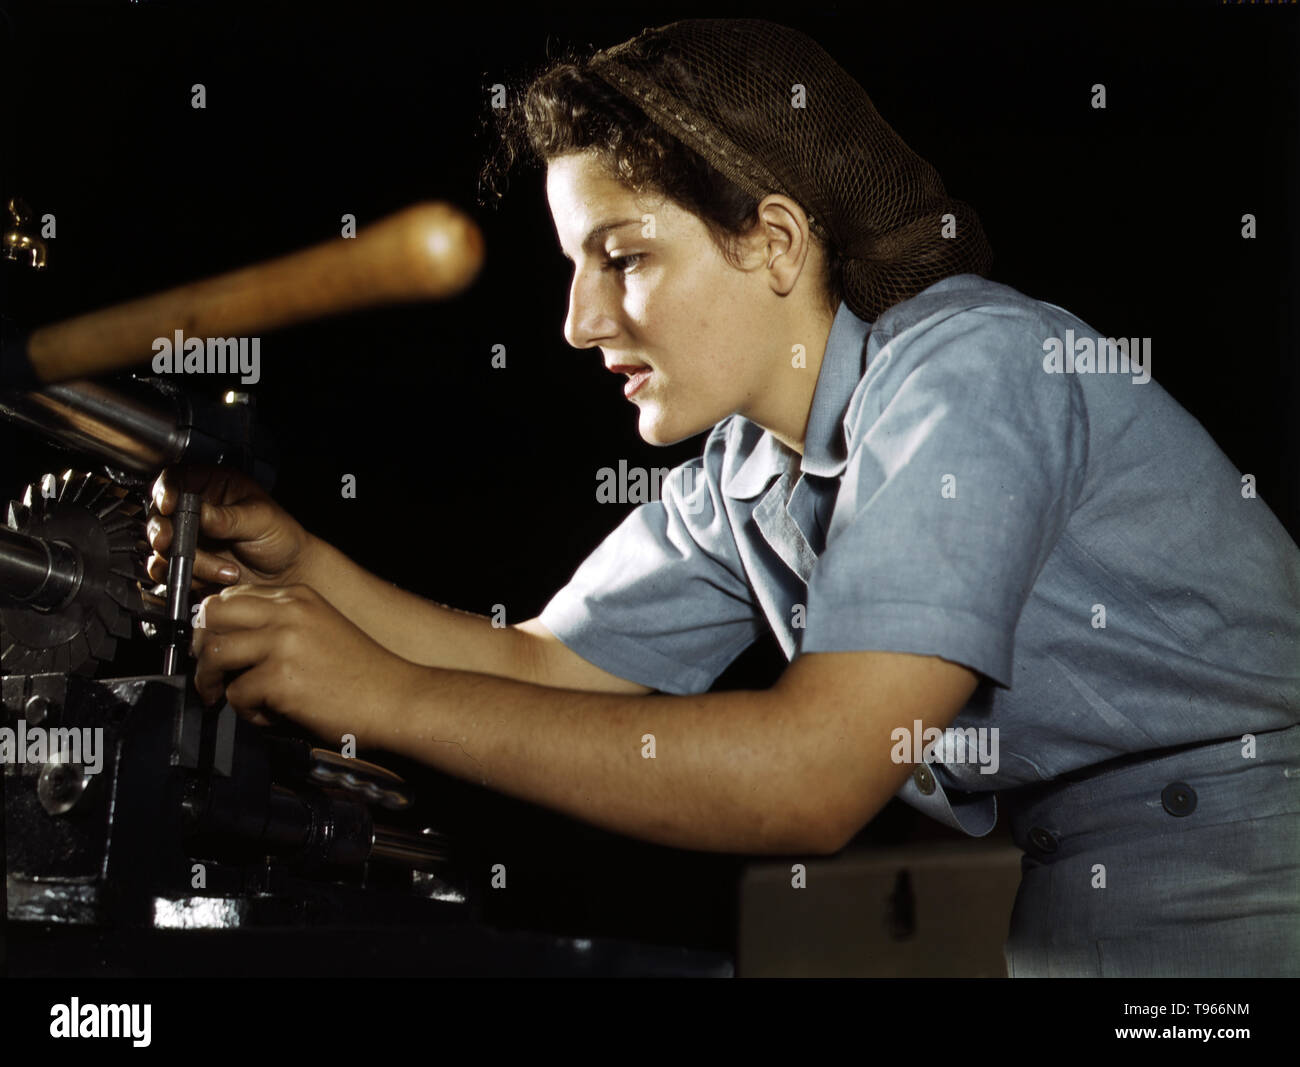 Mary Louise Stepan, 21, used to be a waitress. She has a brother in the air corps. She is working on transport parts in the hand mill, Consolidated Aircraft Corp., Fort Worth, Texas. Although the image of 'Rosie the Riveter' reflected the industrial work of welders and riveters, the majority of working women filled non-factory positions in every sector of the economy. What unified the experiences of these women was that they proved to themselves, and the country, that they could do a man's job and could do it well. Photographed by Howard R. Hollem, 1942. Stock Photo